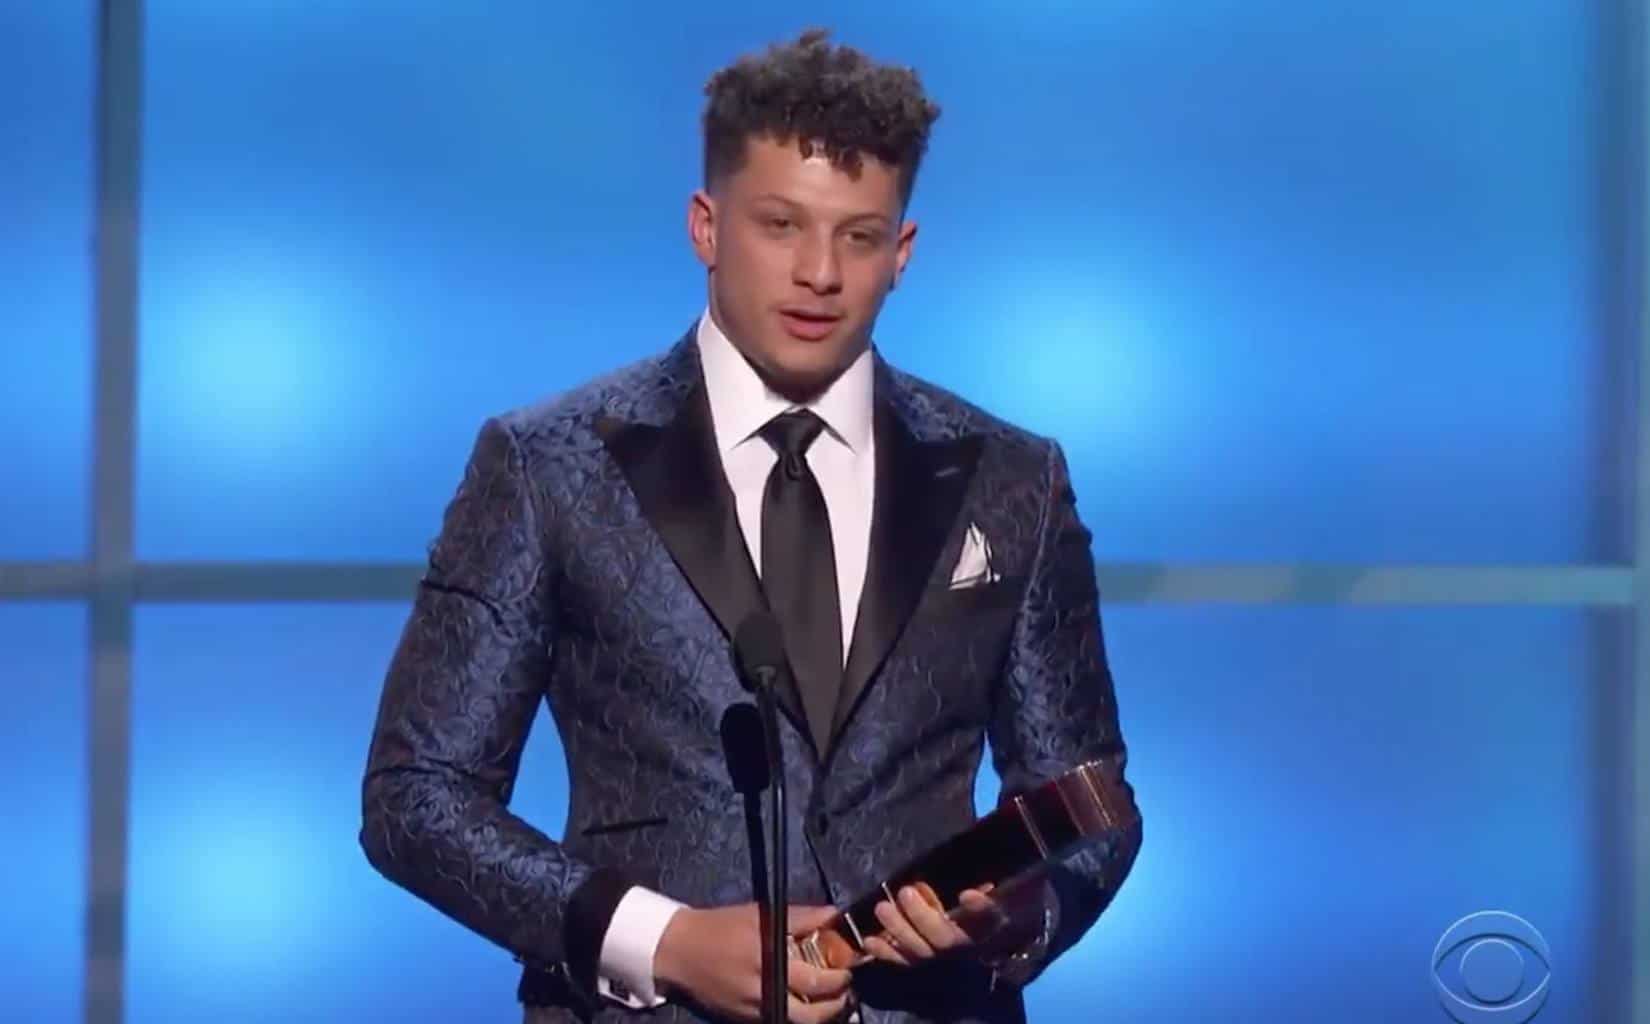 The Nfl S Newest Mvp Patrick Mahomes Showcases A Humble Brand Of Faith Relevant